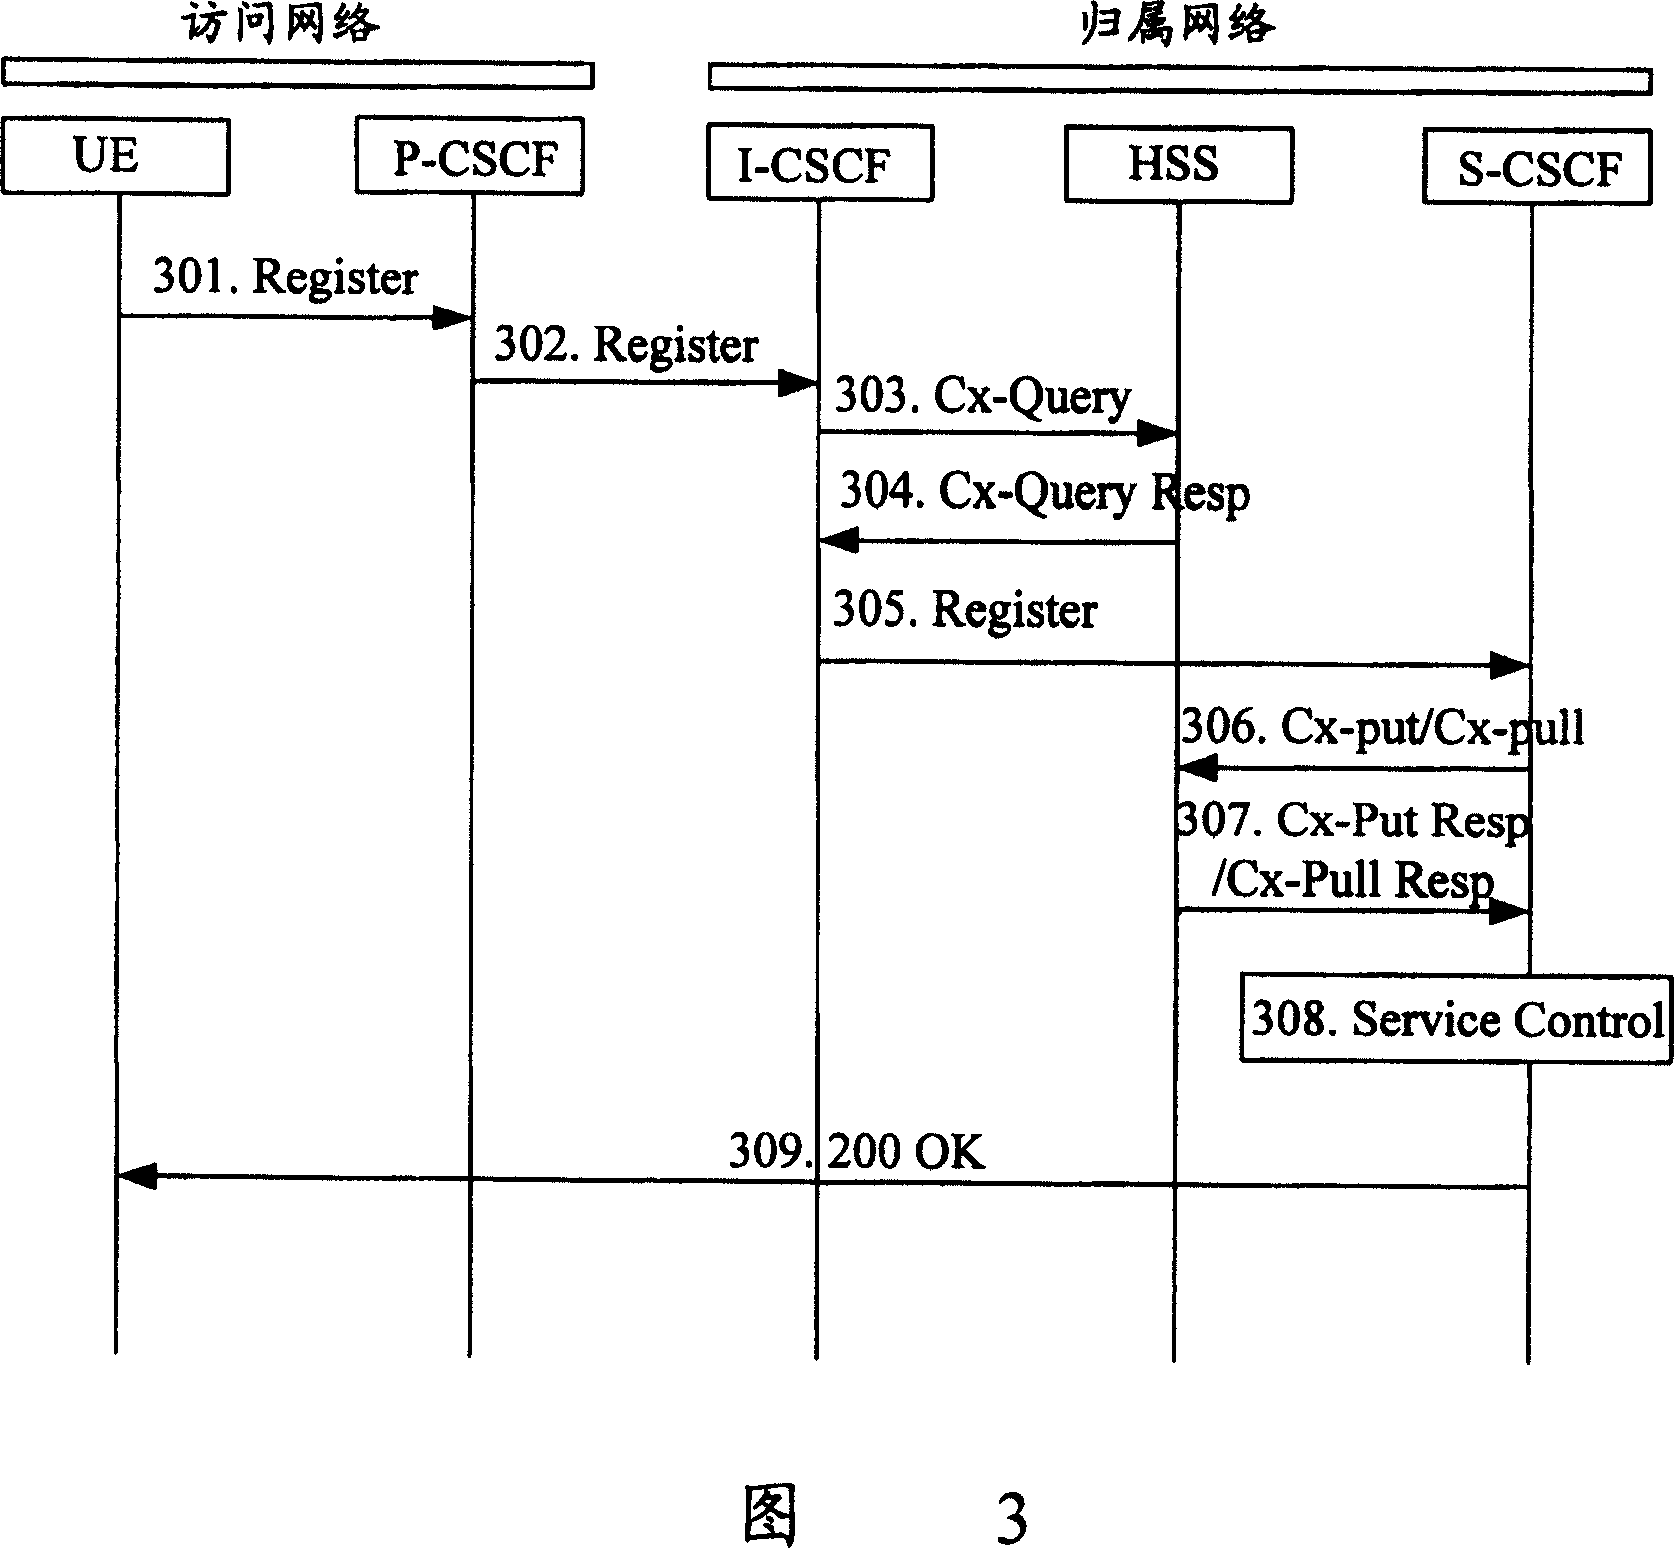 Method for abating interface loads of Home Subscriber Servers (HSS)